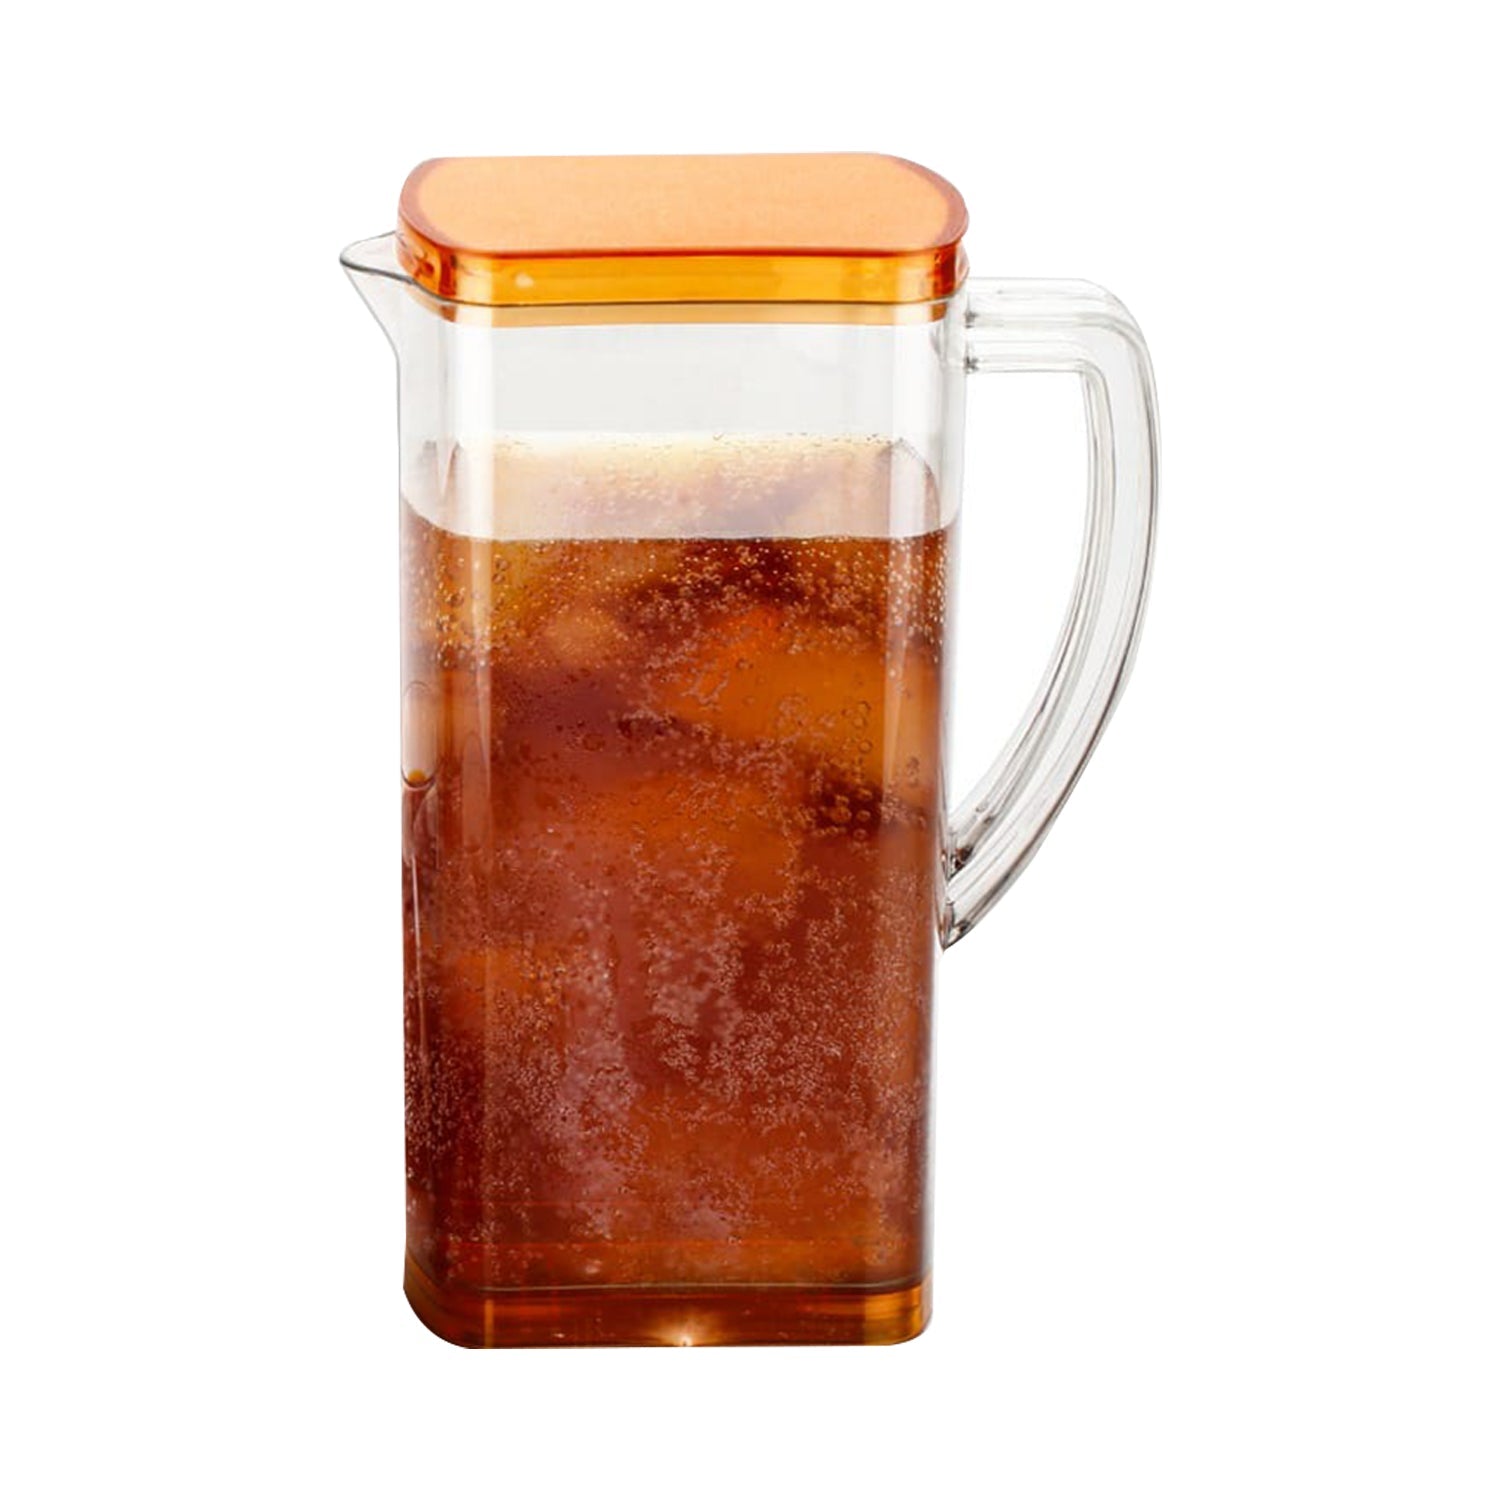 2789 2000Ml Square Jug For Carrying Water And Types Of Juices And Beverages And All. DeoDap